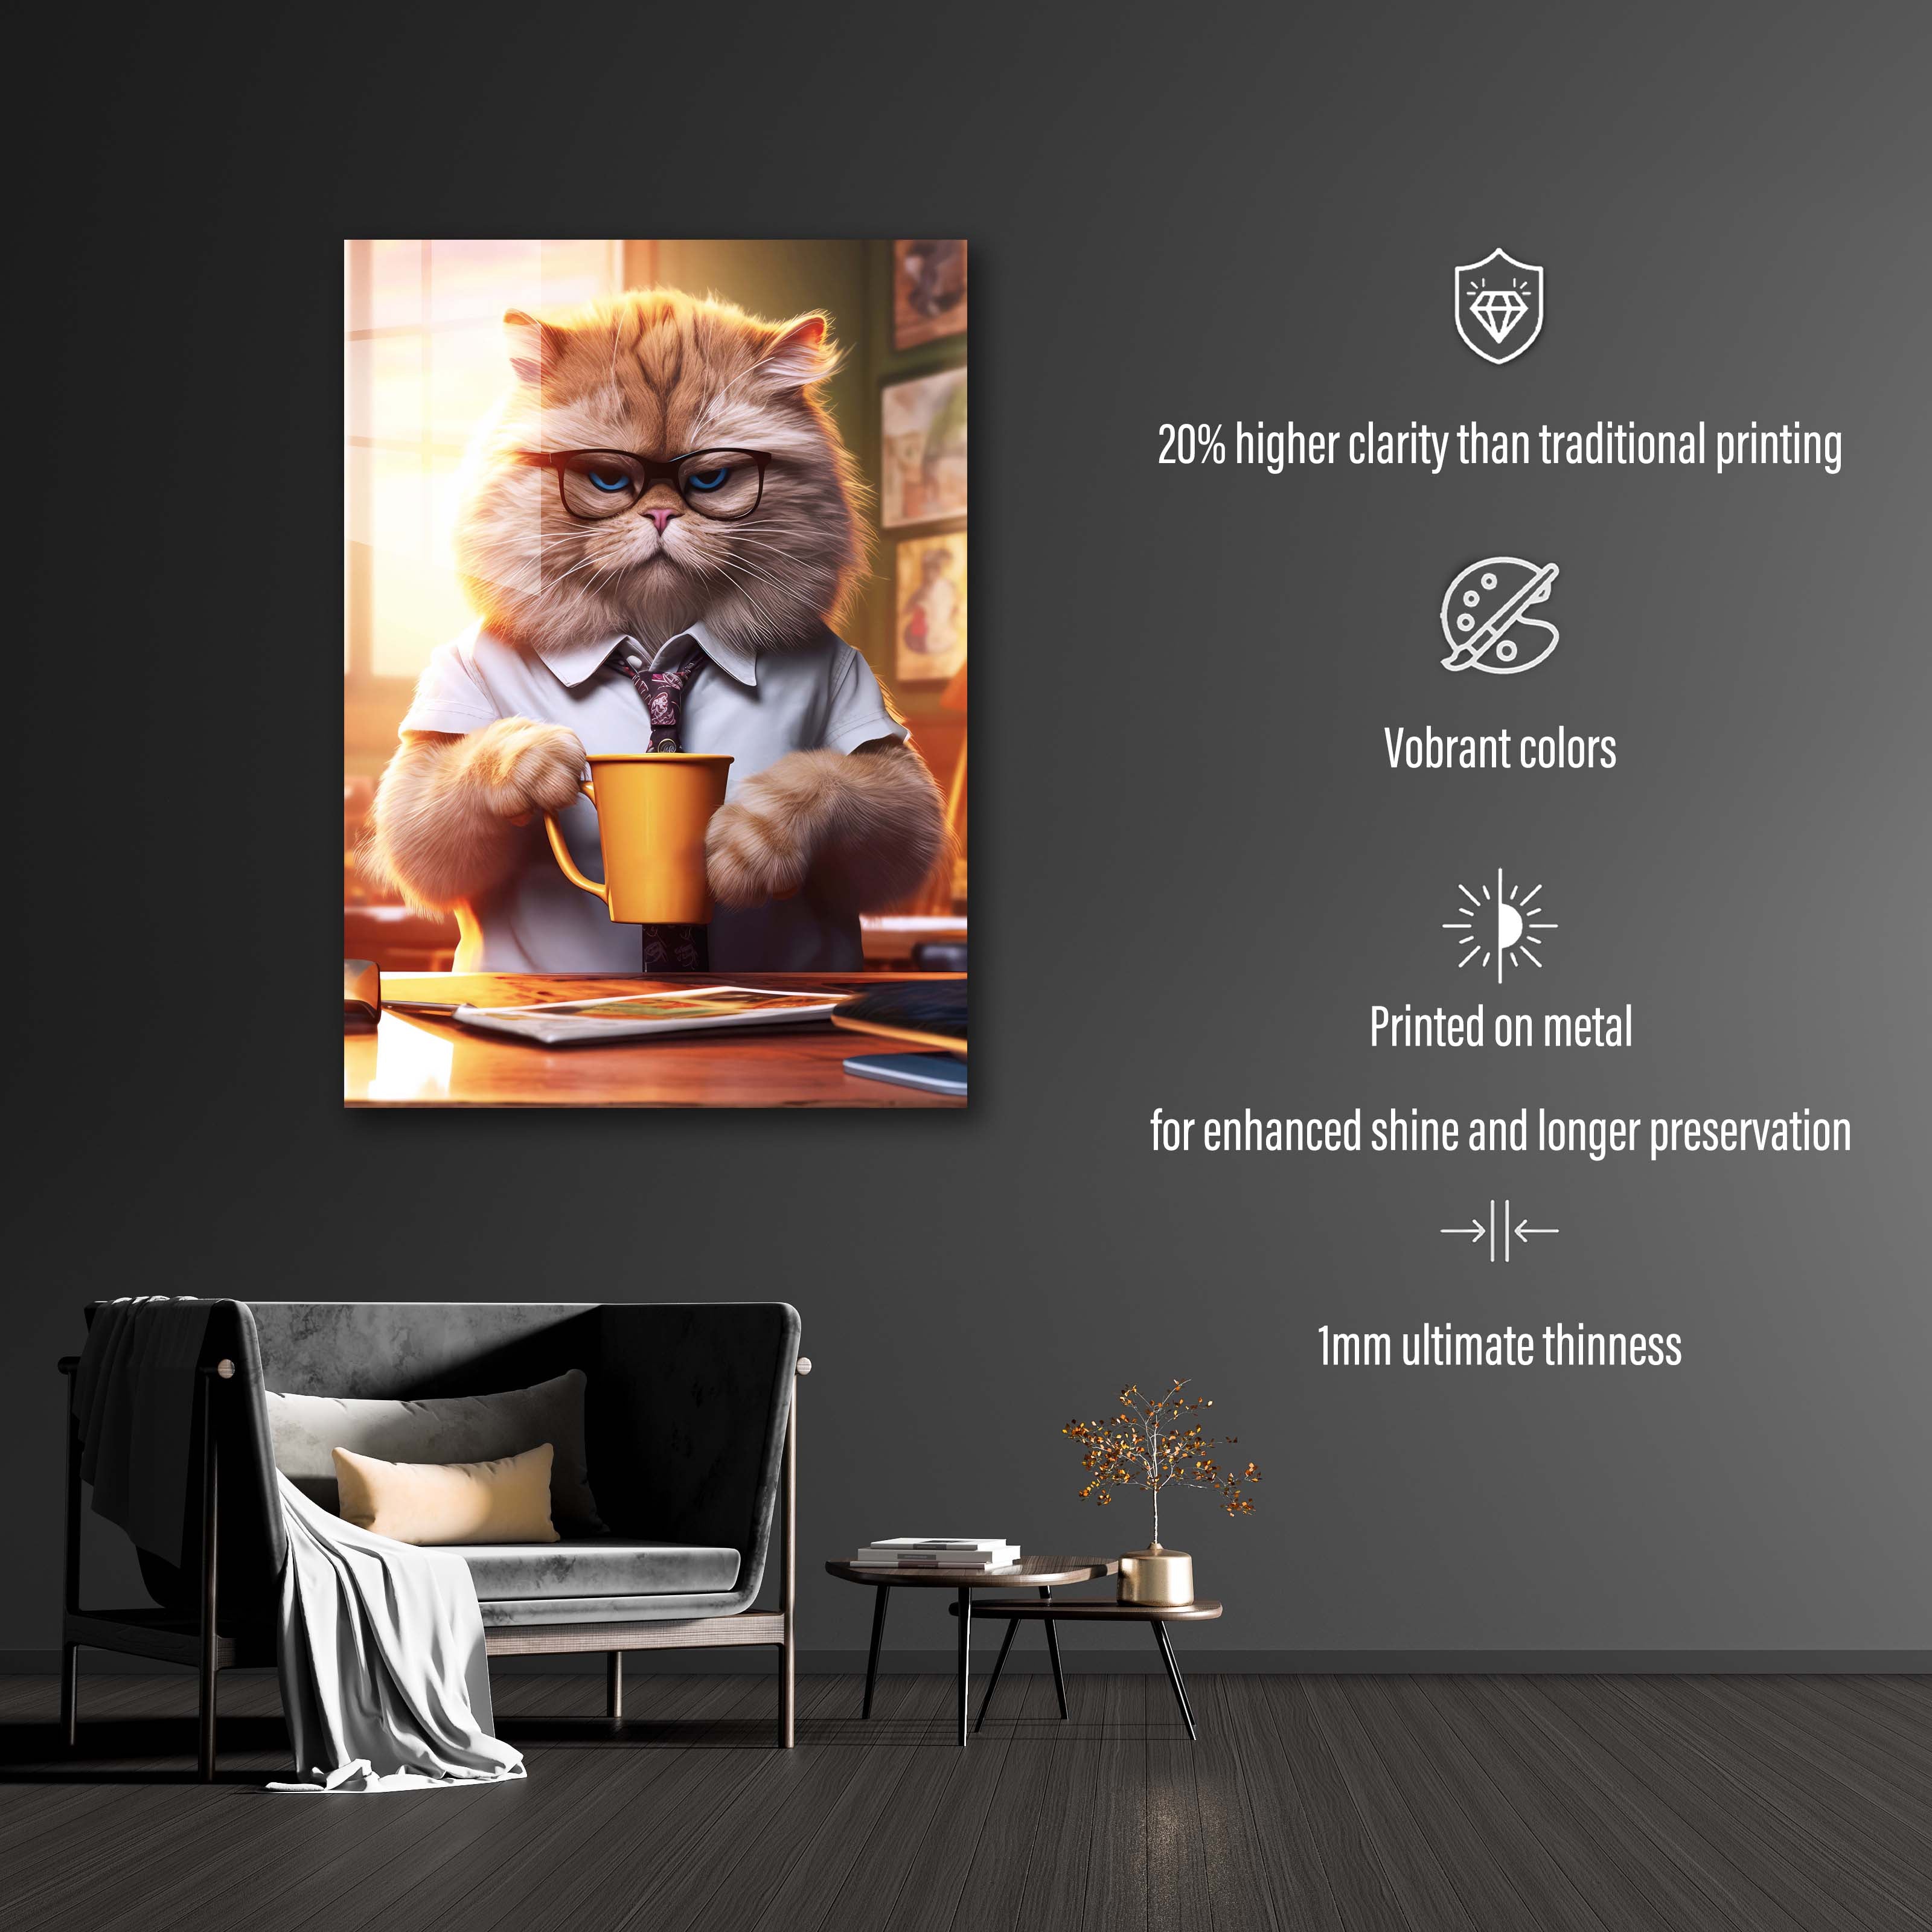 Cat Coffee-designed by @Puffy Design